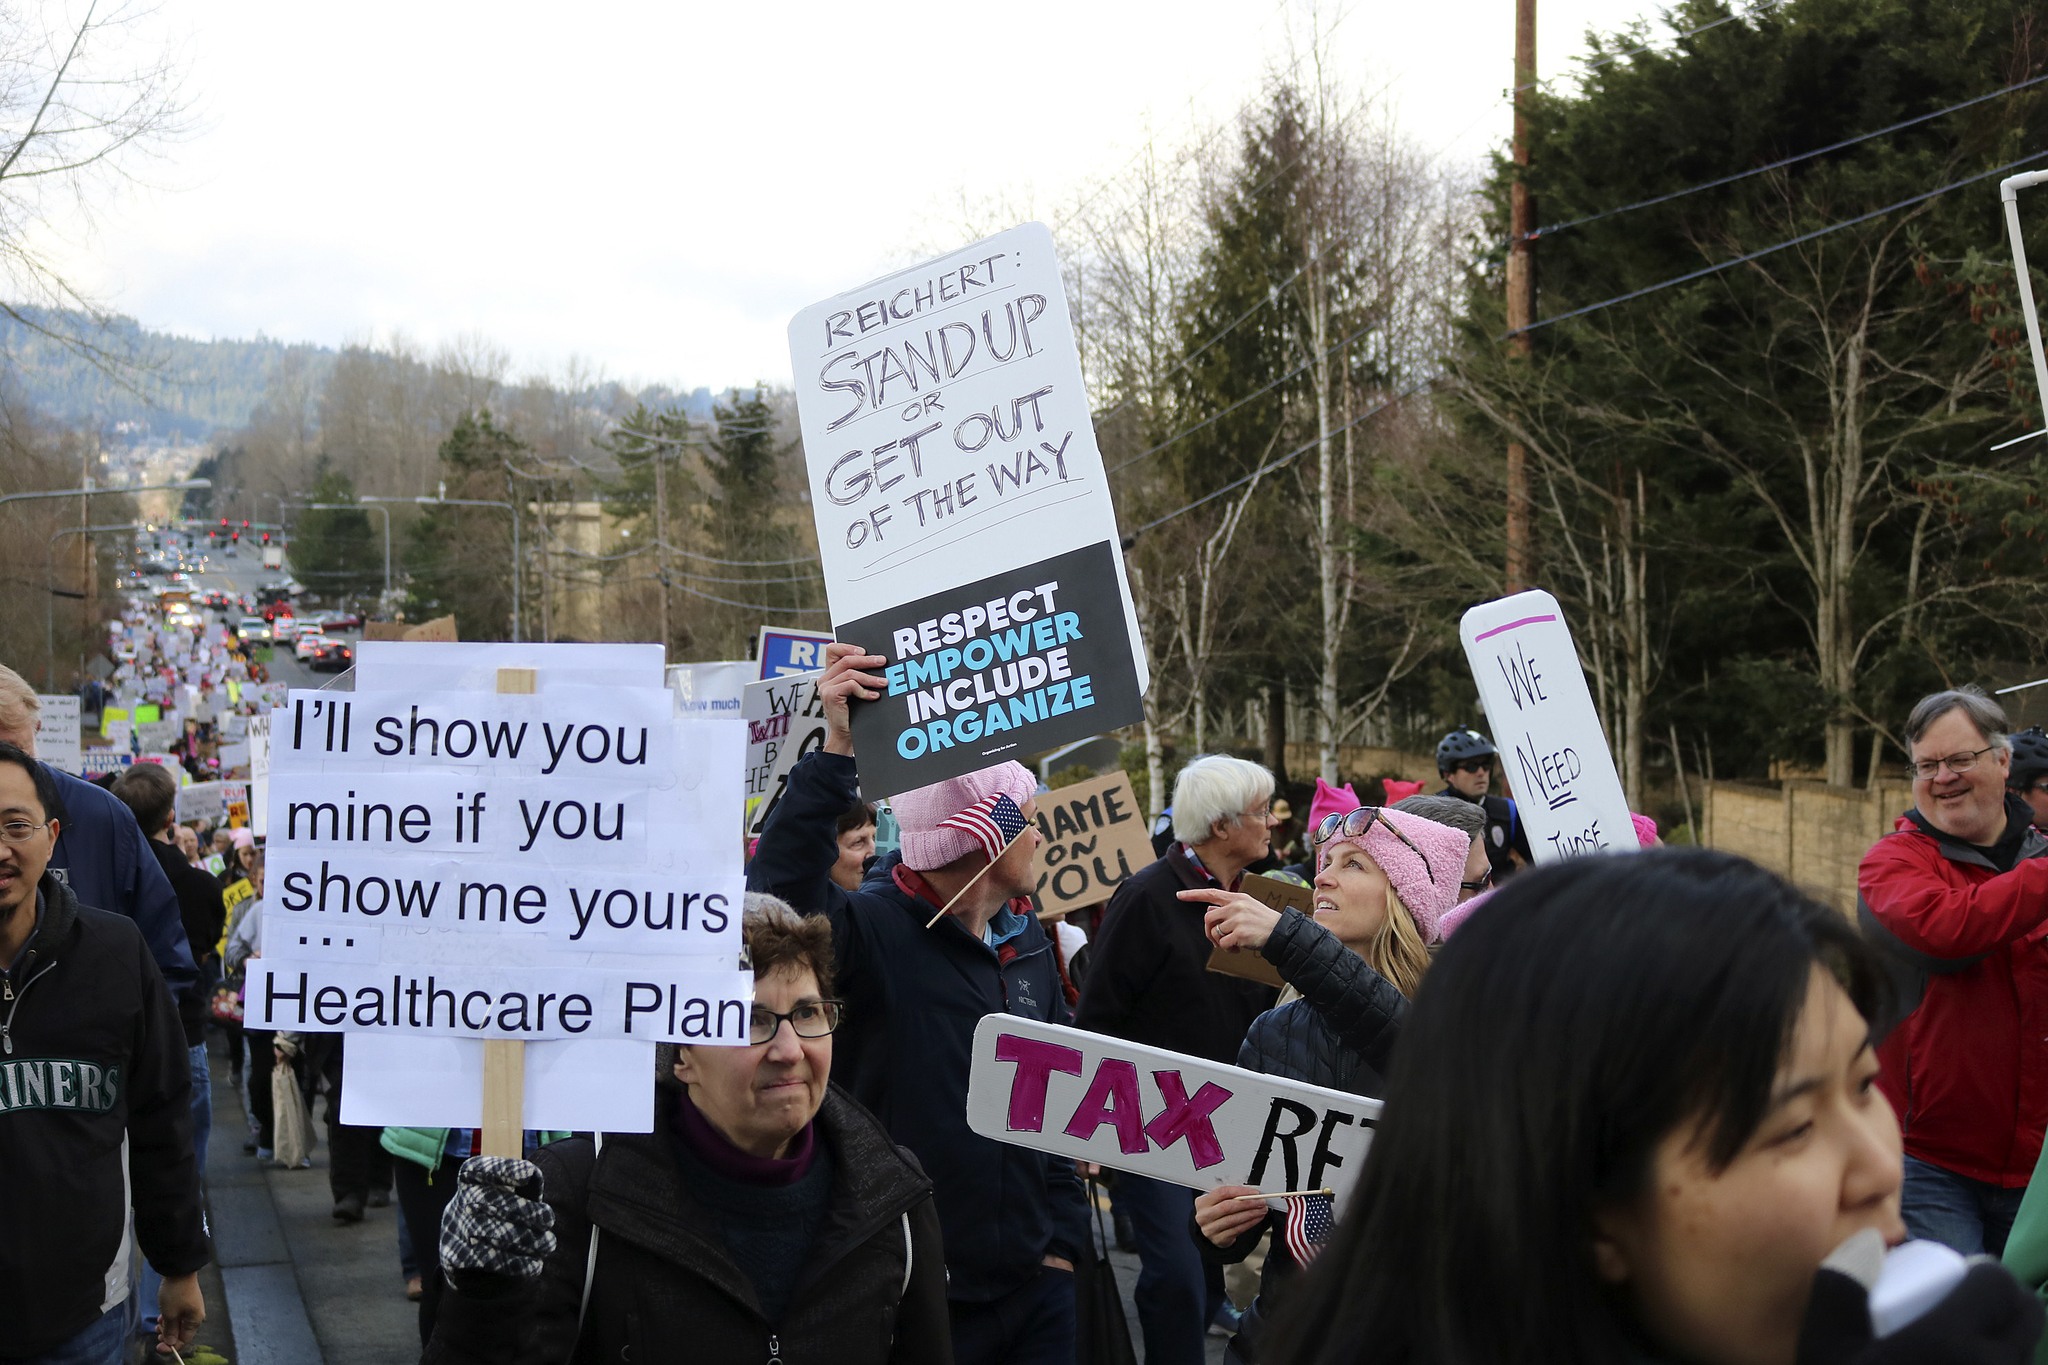 A rally at Rep. David Reichert’s Issaquah office. Photo by Nicole Jennings/Issaquah Reporter